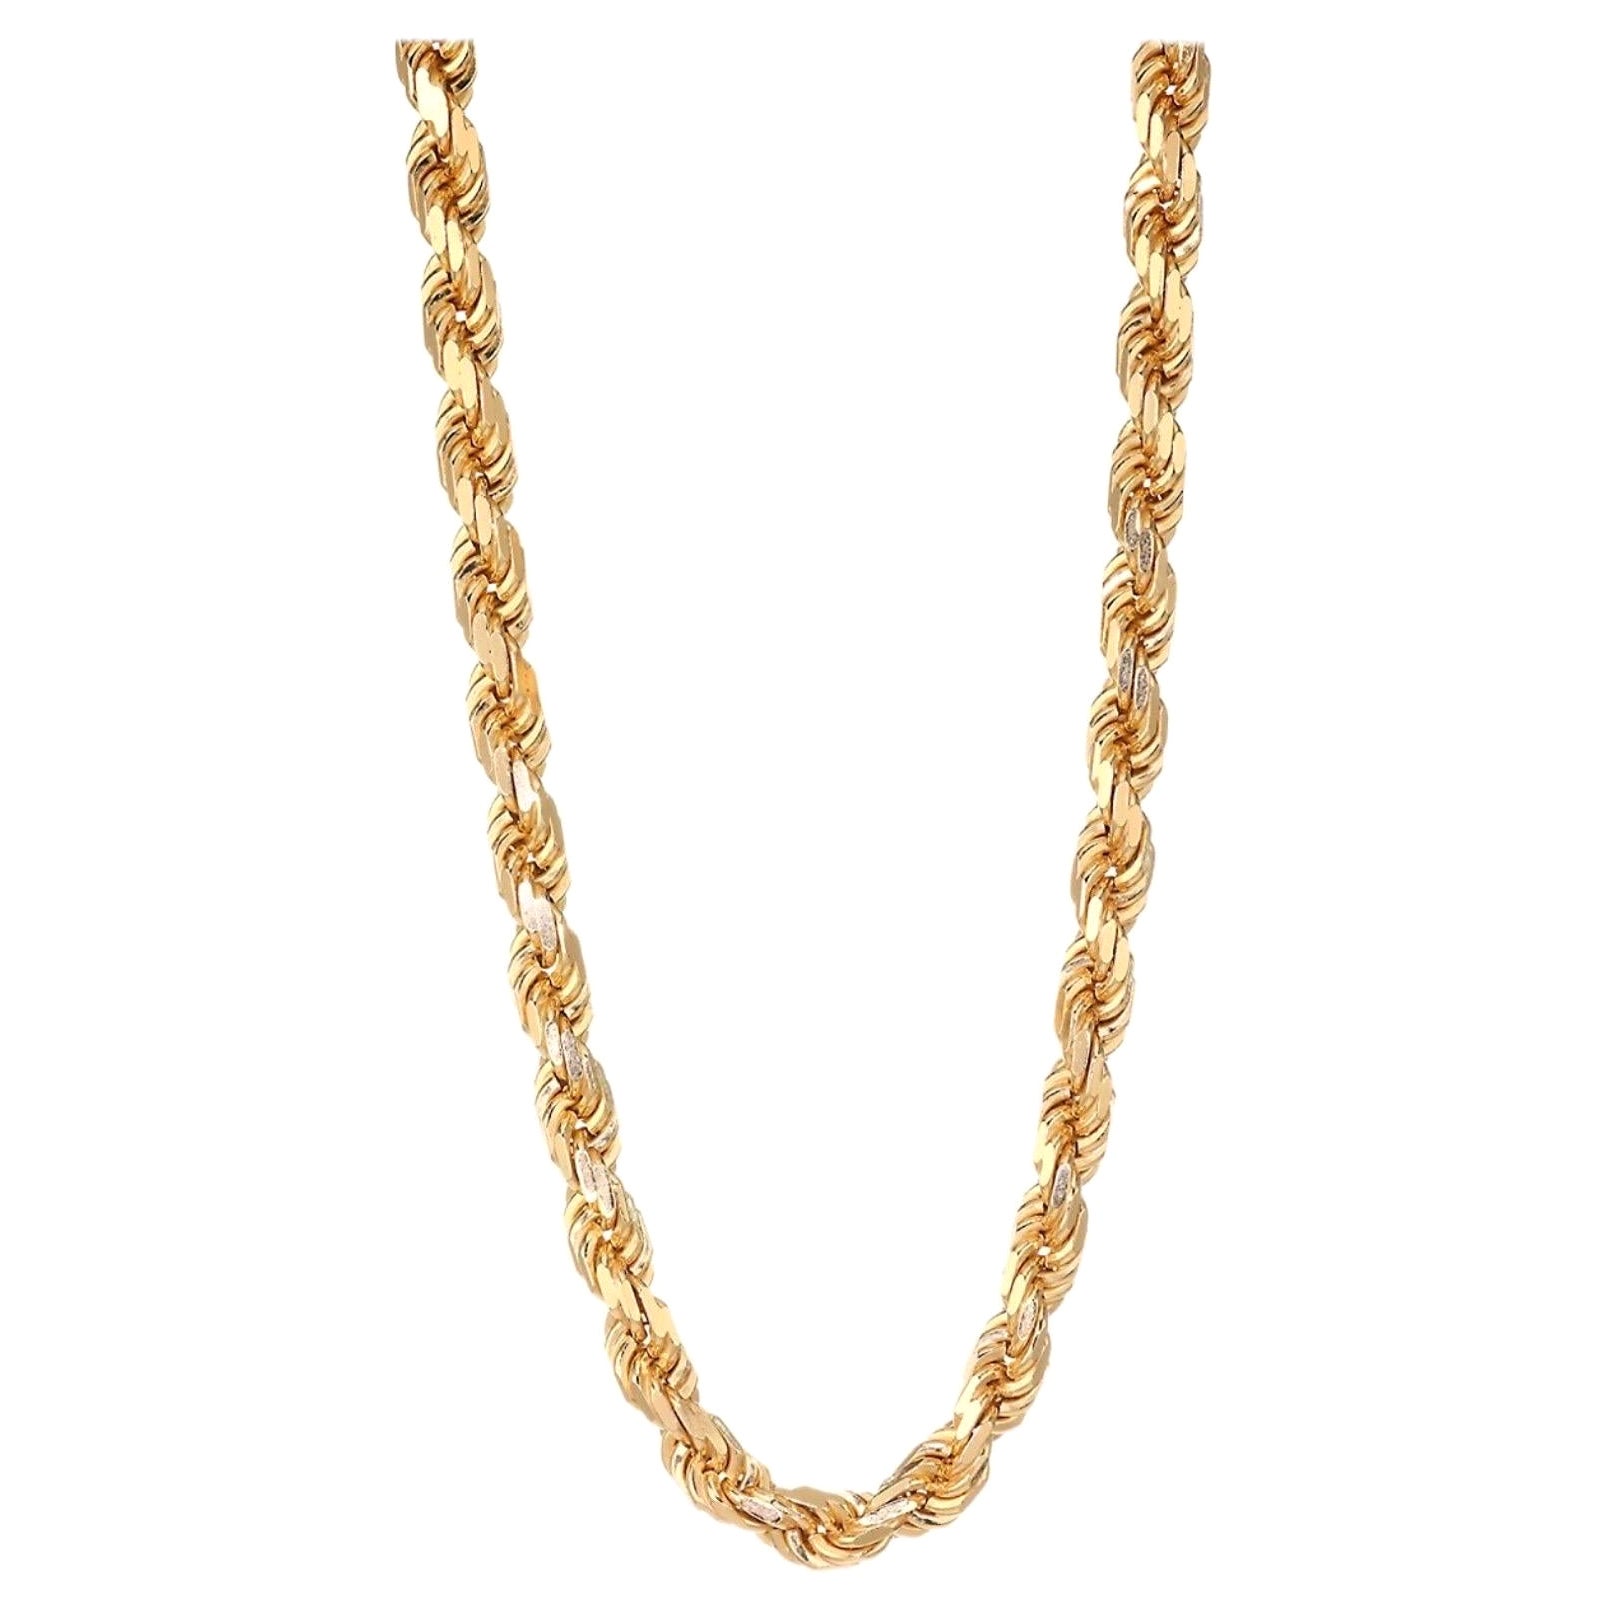 Vintage 14 Karat Yellow Gold 17 Gm, Rope Chain Necklace, 24 Inch long For Sale